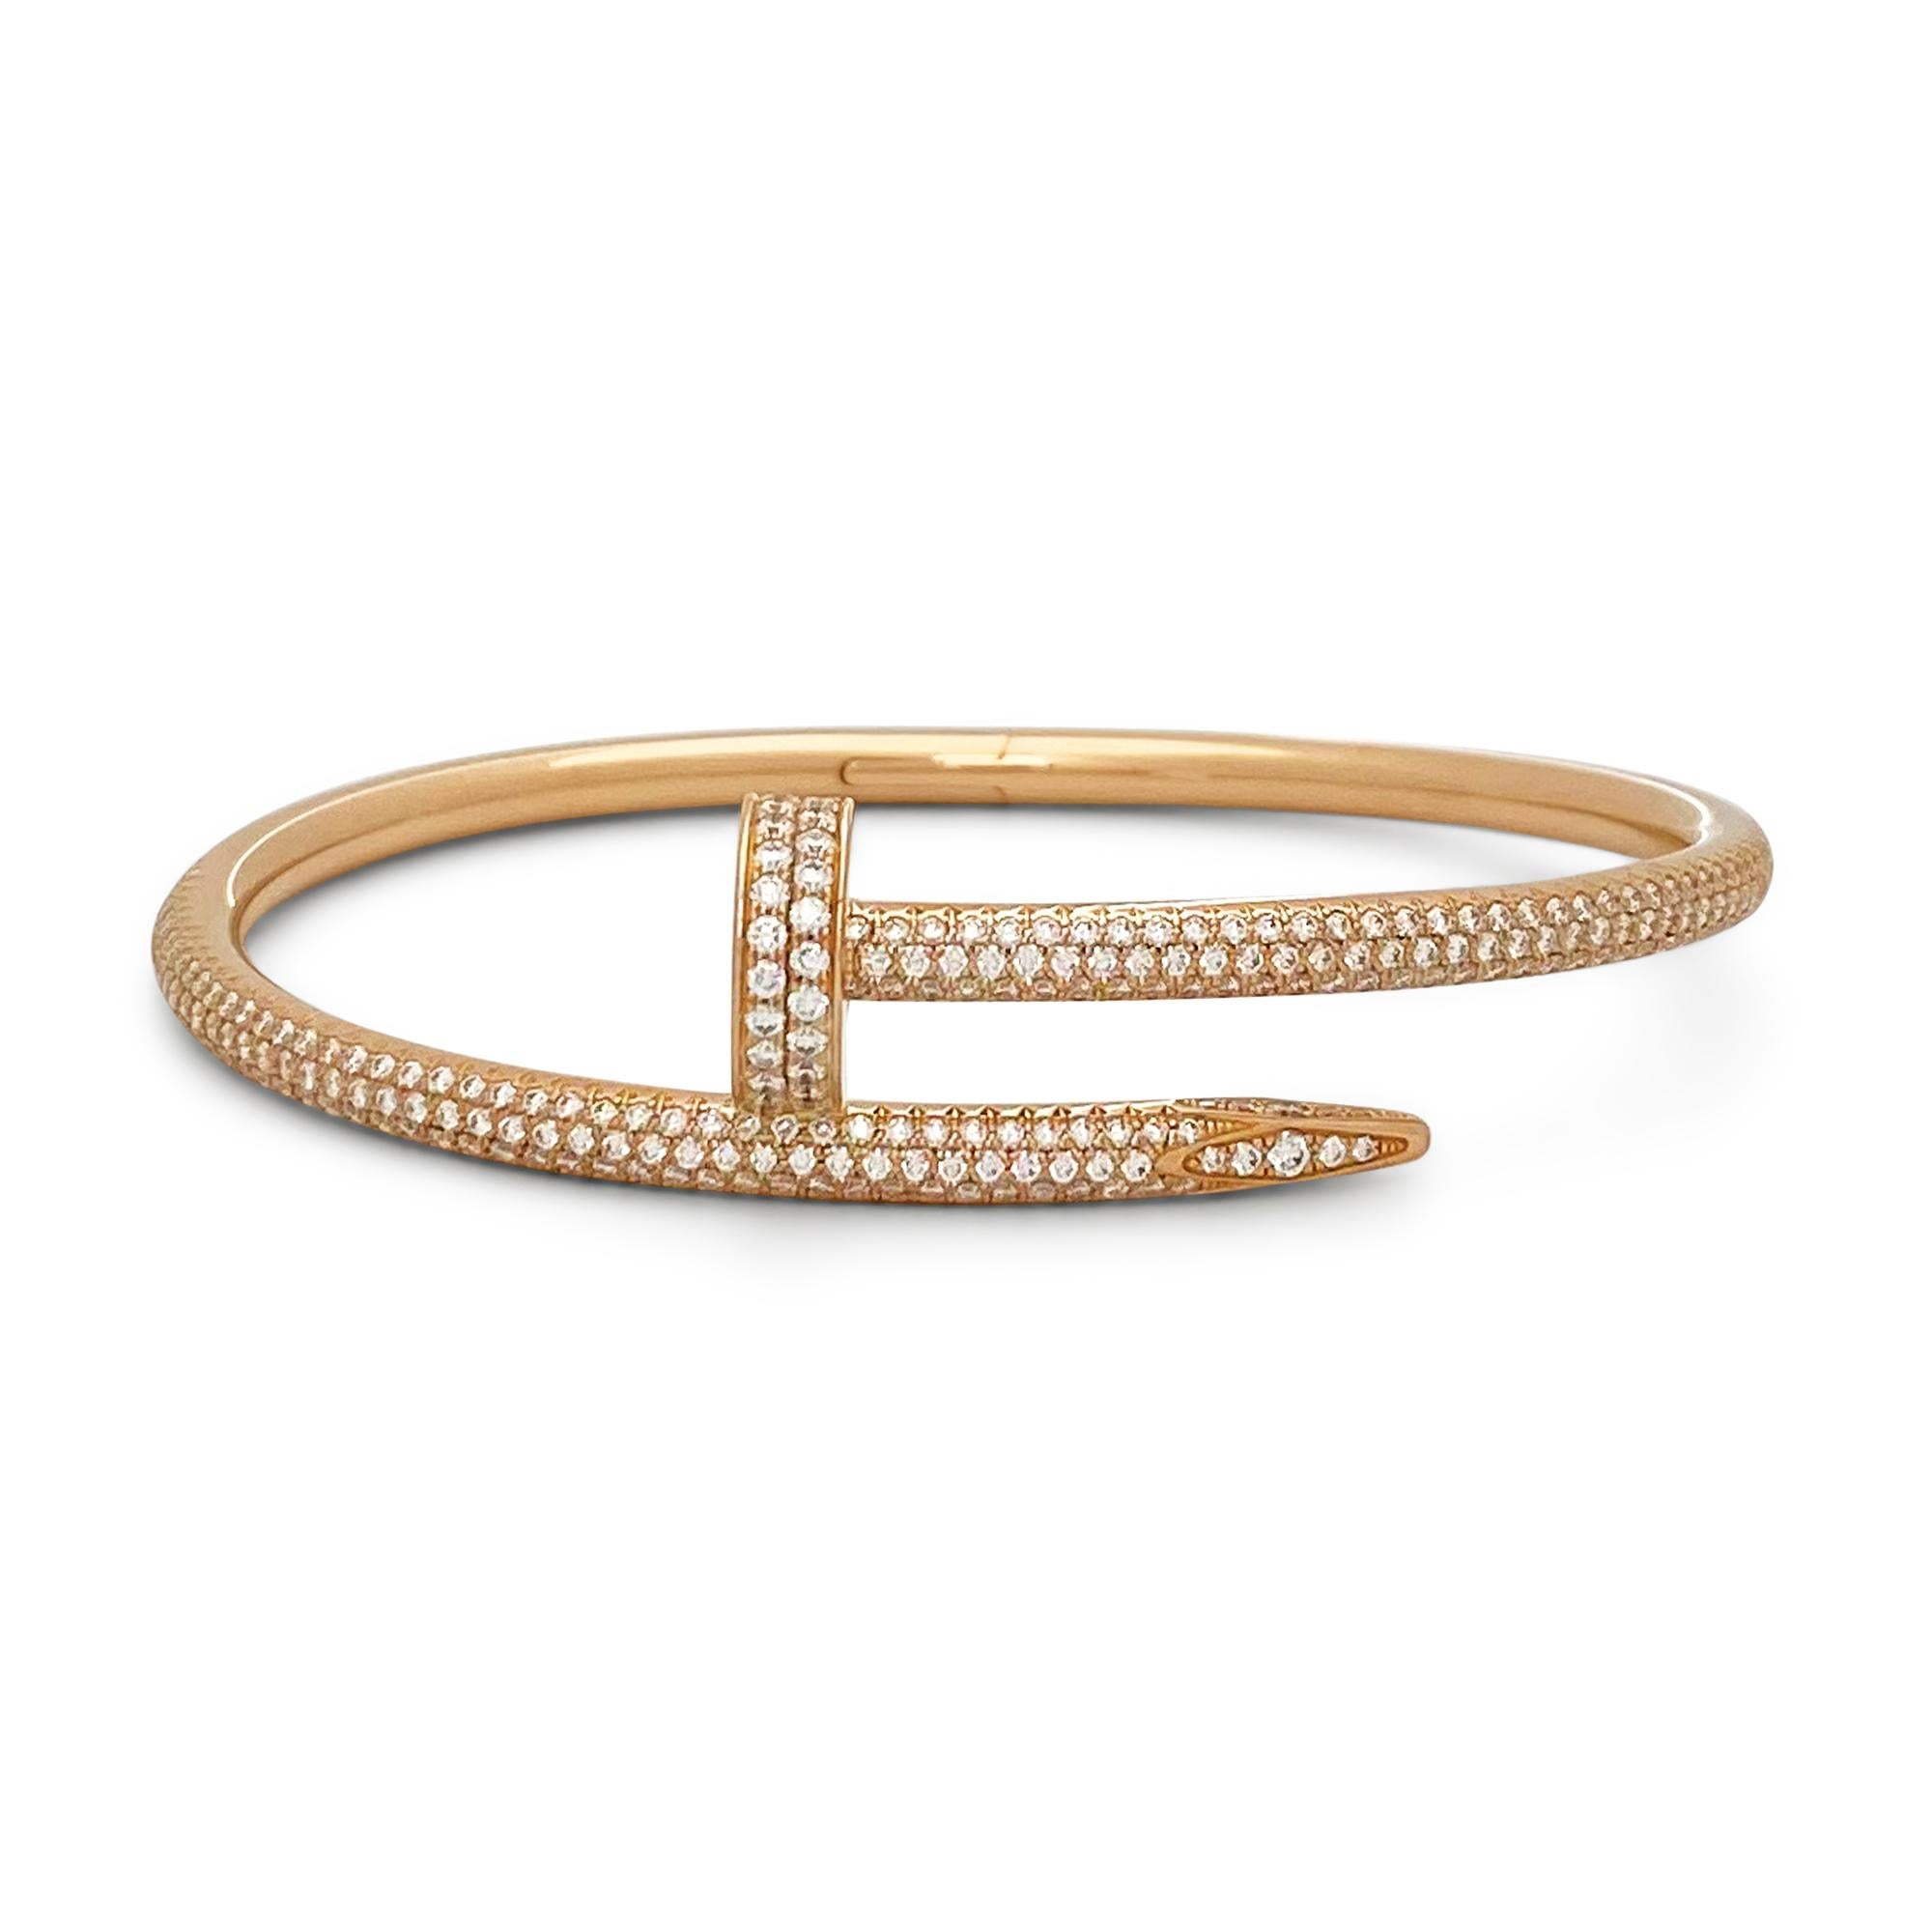 Designed as a 'just a nail', this authentic Cartier 'Juste un Clou' bracelet is an innovative twist on a familiar and ordinary object. The bracelet is set with high-quality round brilliant cut diamonds (E-F color, VS clarity) weighing an estimated